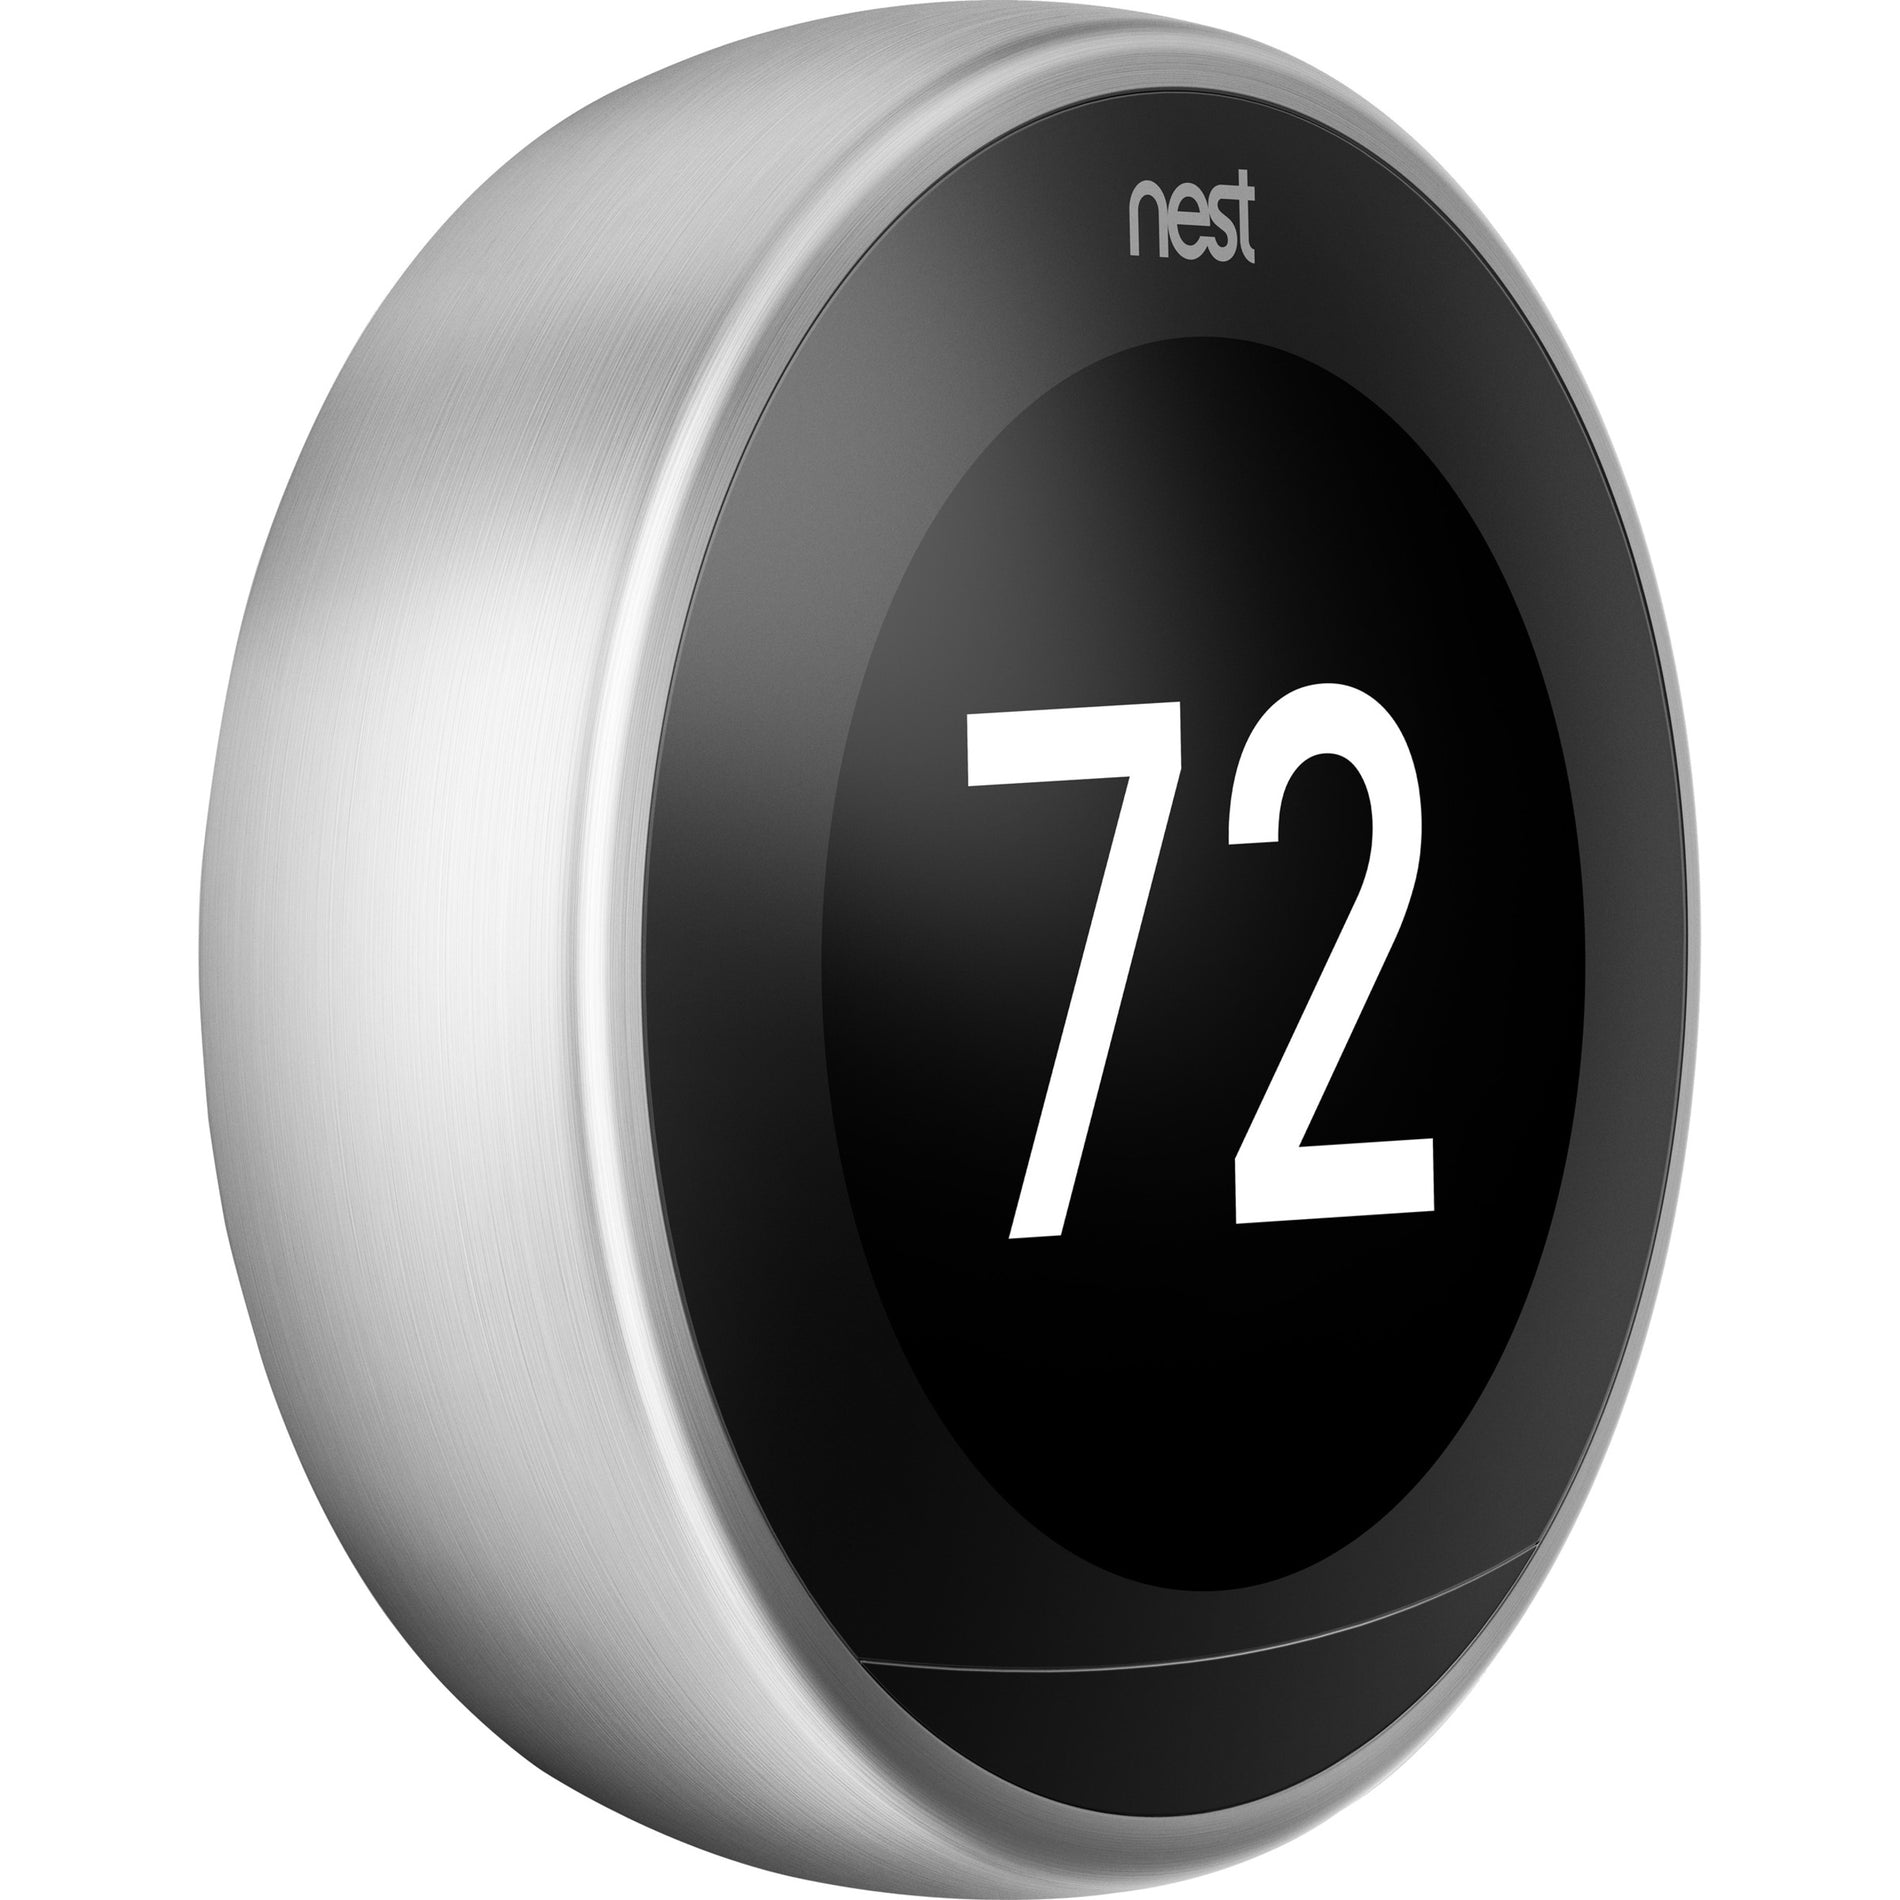 Google Nest T3019US Learning Thermostat, Energy Star, Tablet, PC, Home, Smartphone, Polished Steel